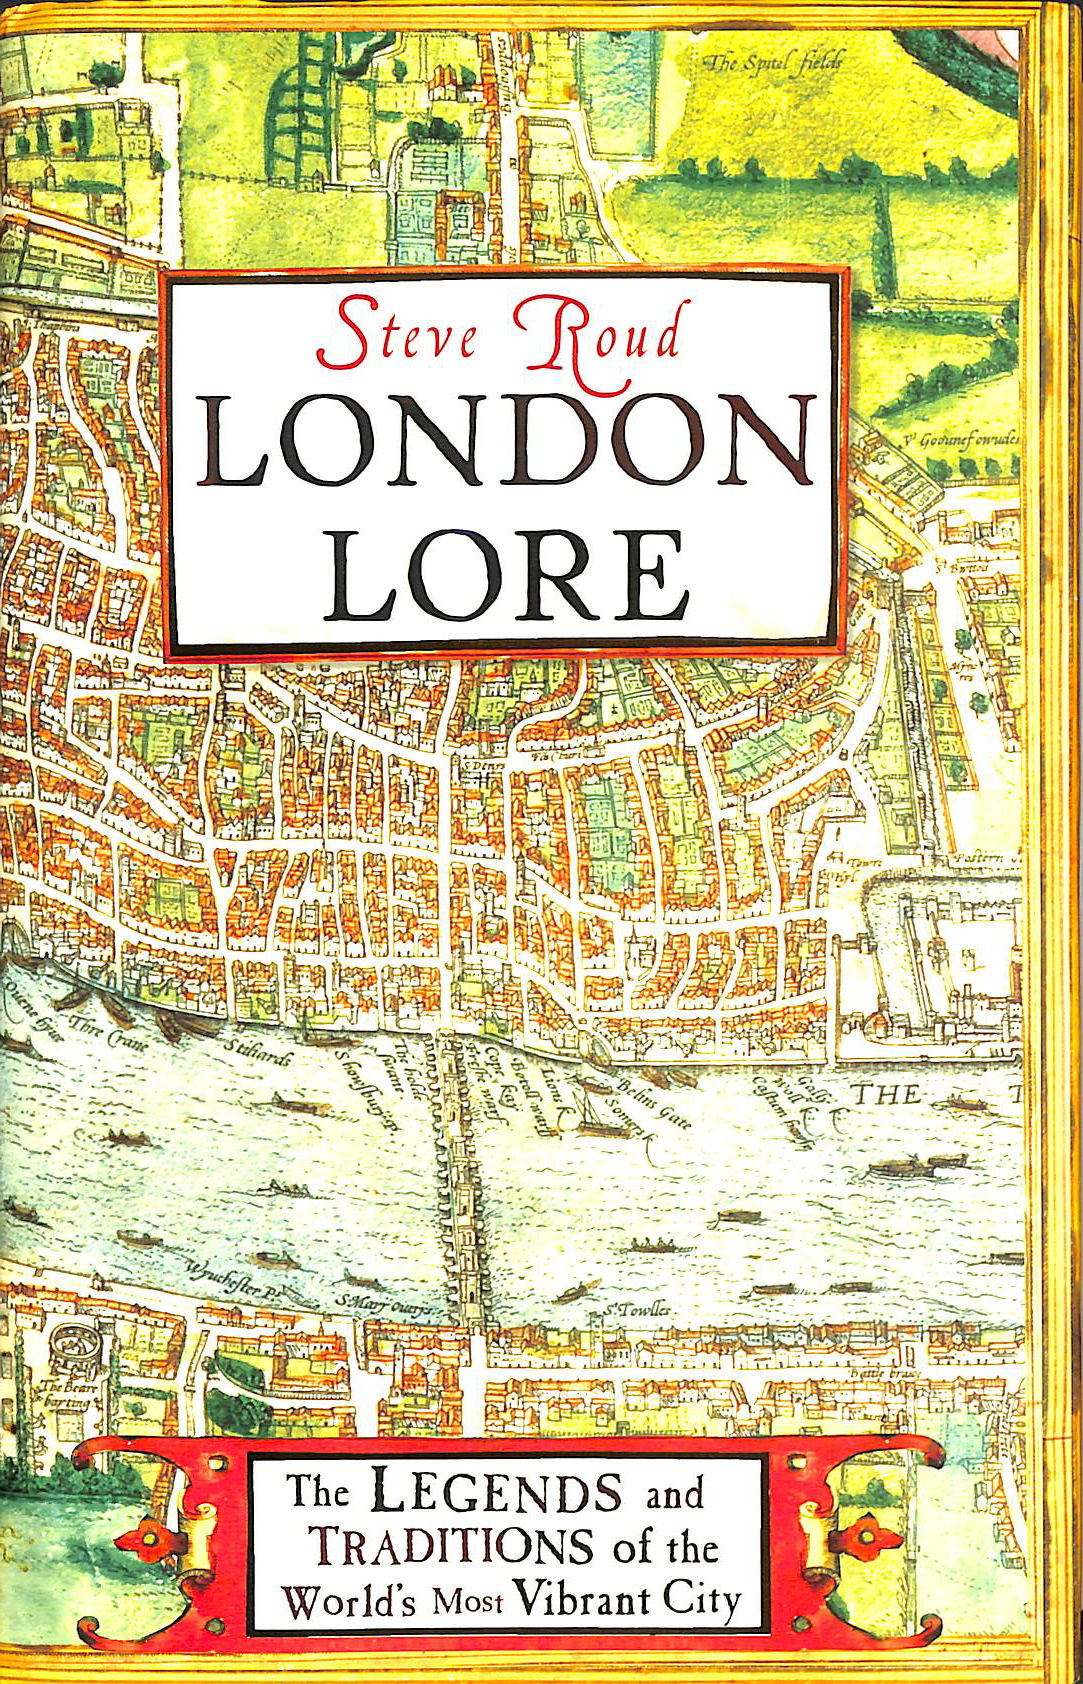 ROUD, STEVE - London Lore: The legends and traditions of the world's most vibrant city